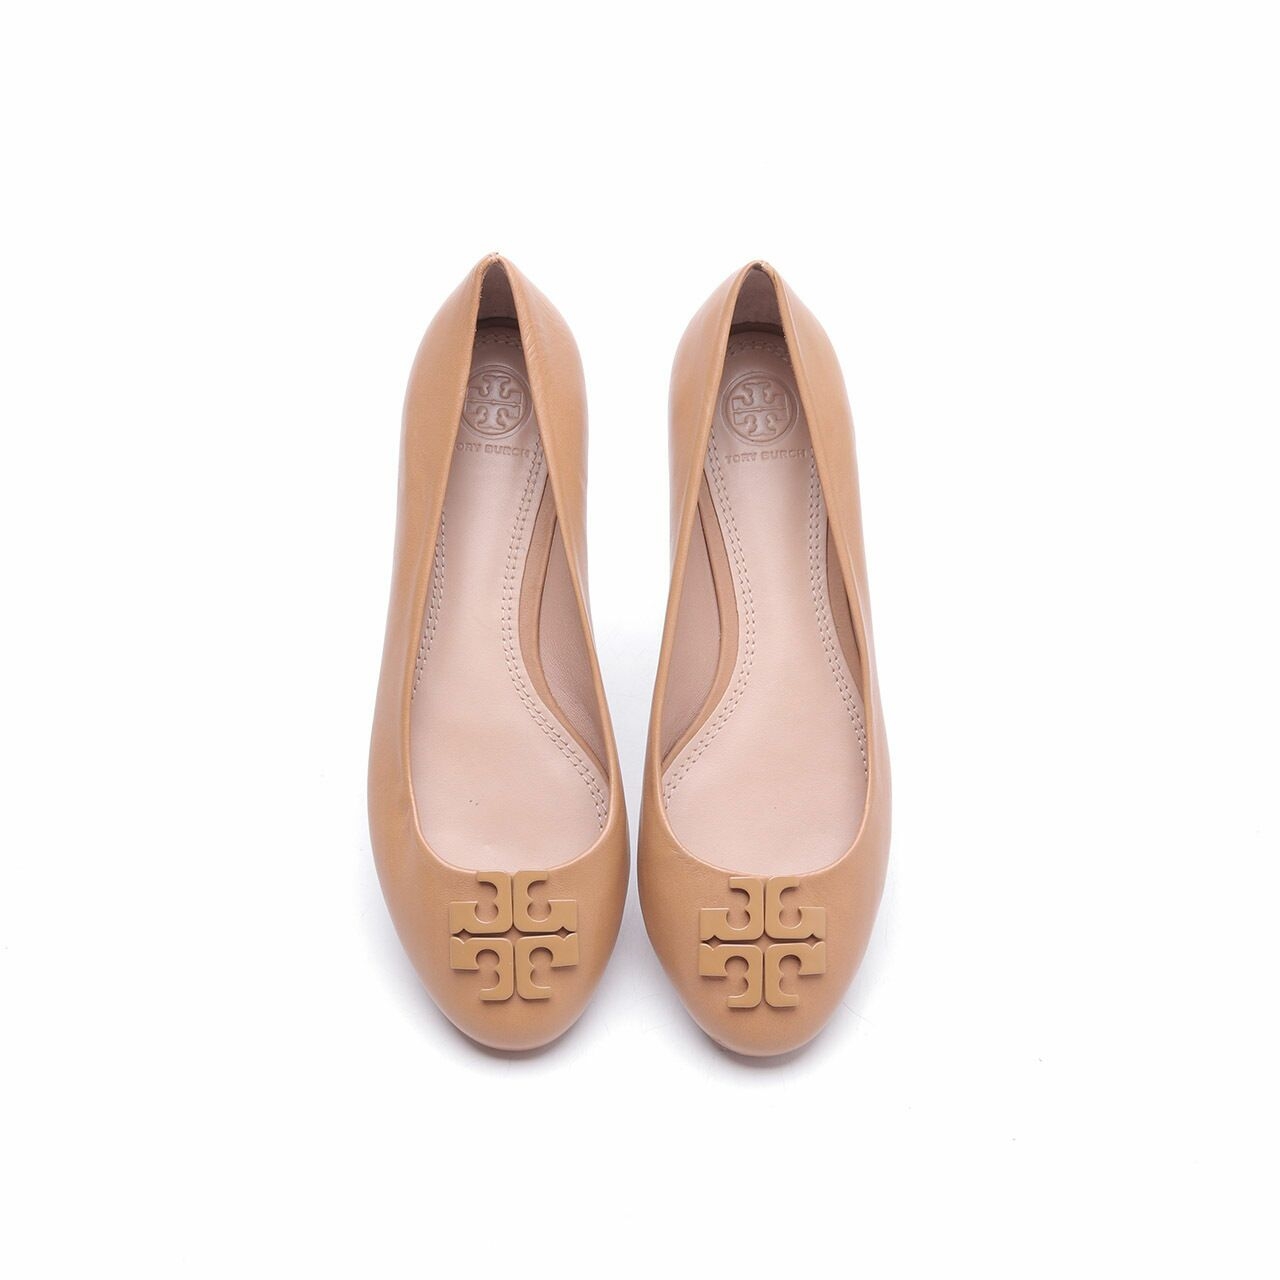 Tory Burch Lowell 2 Leather Blond Flats Shoes